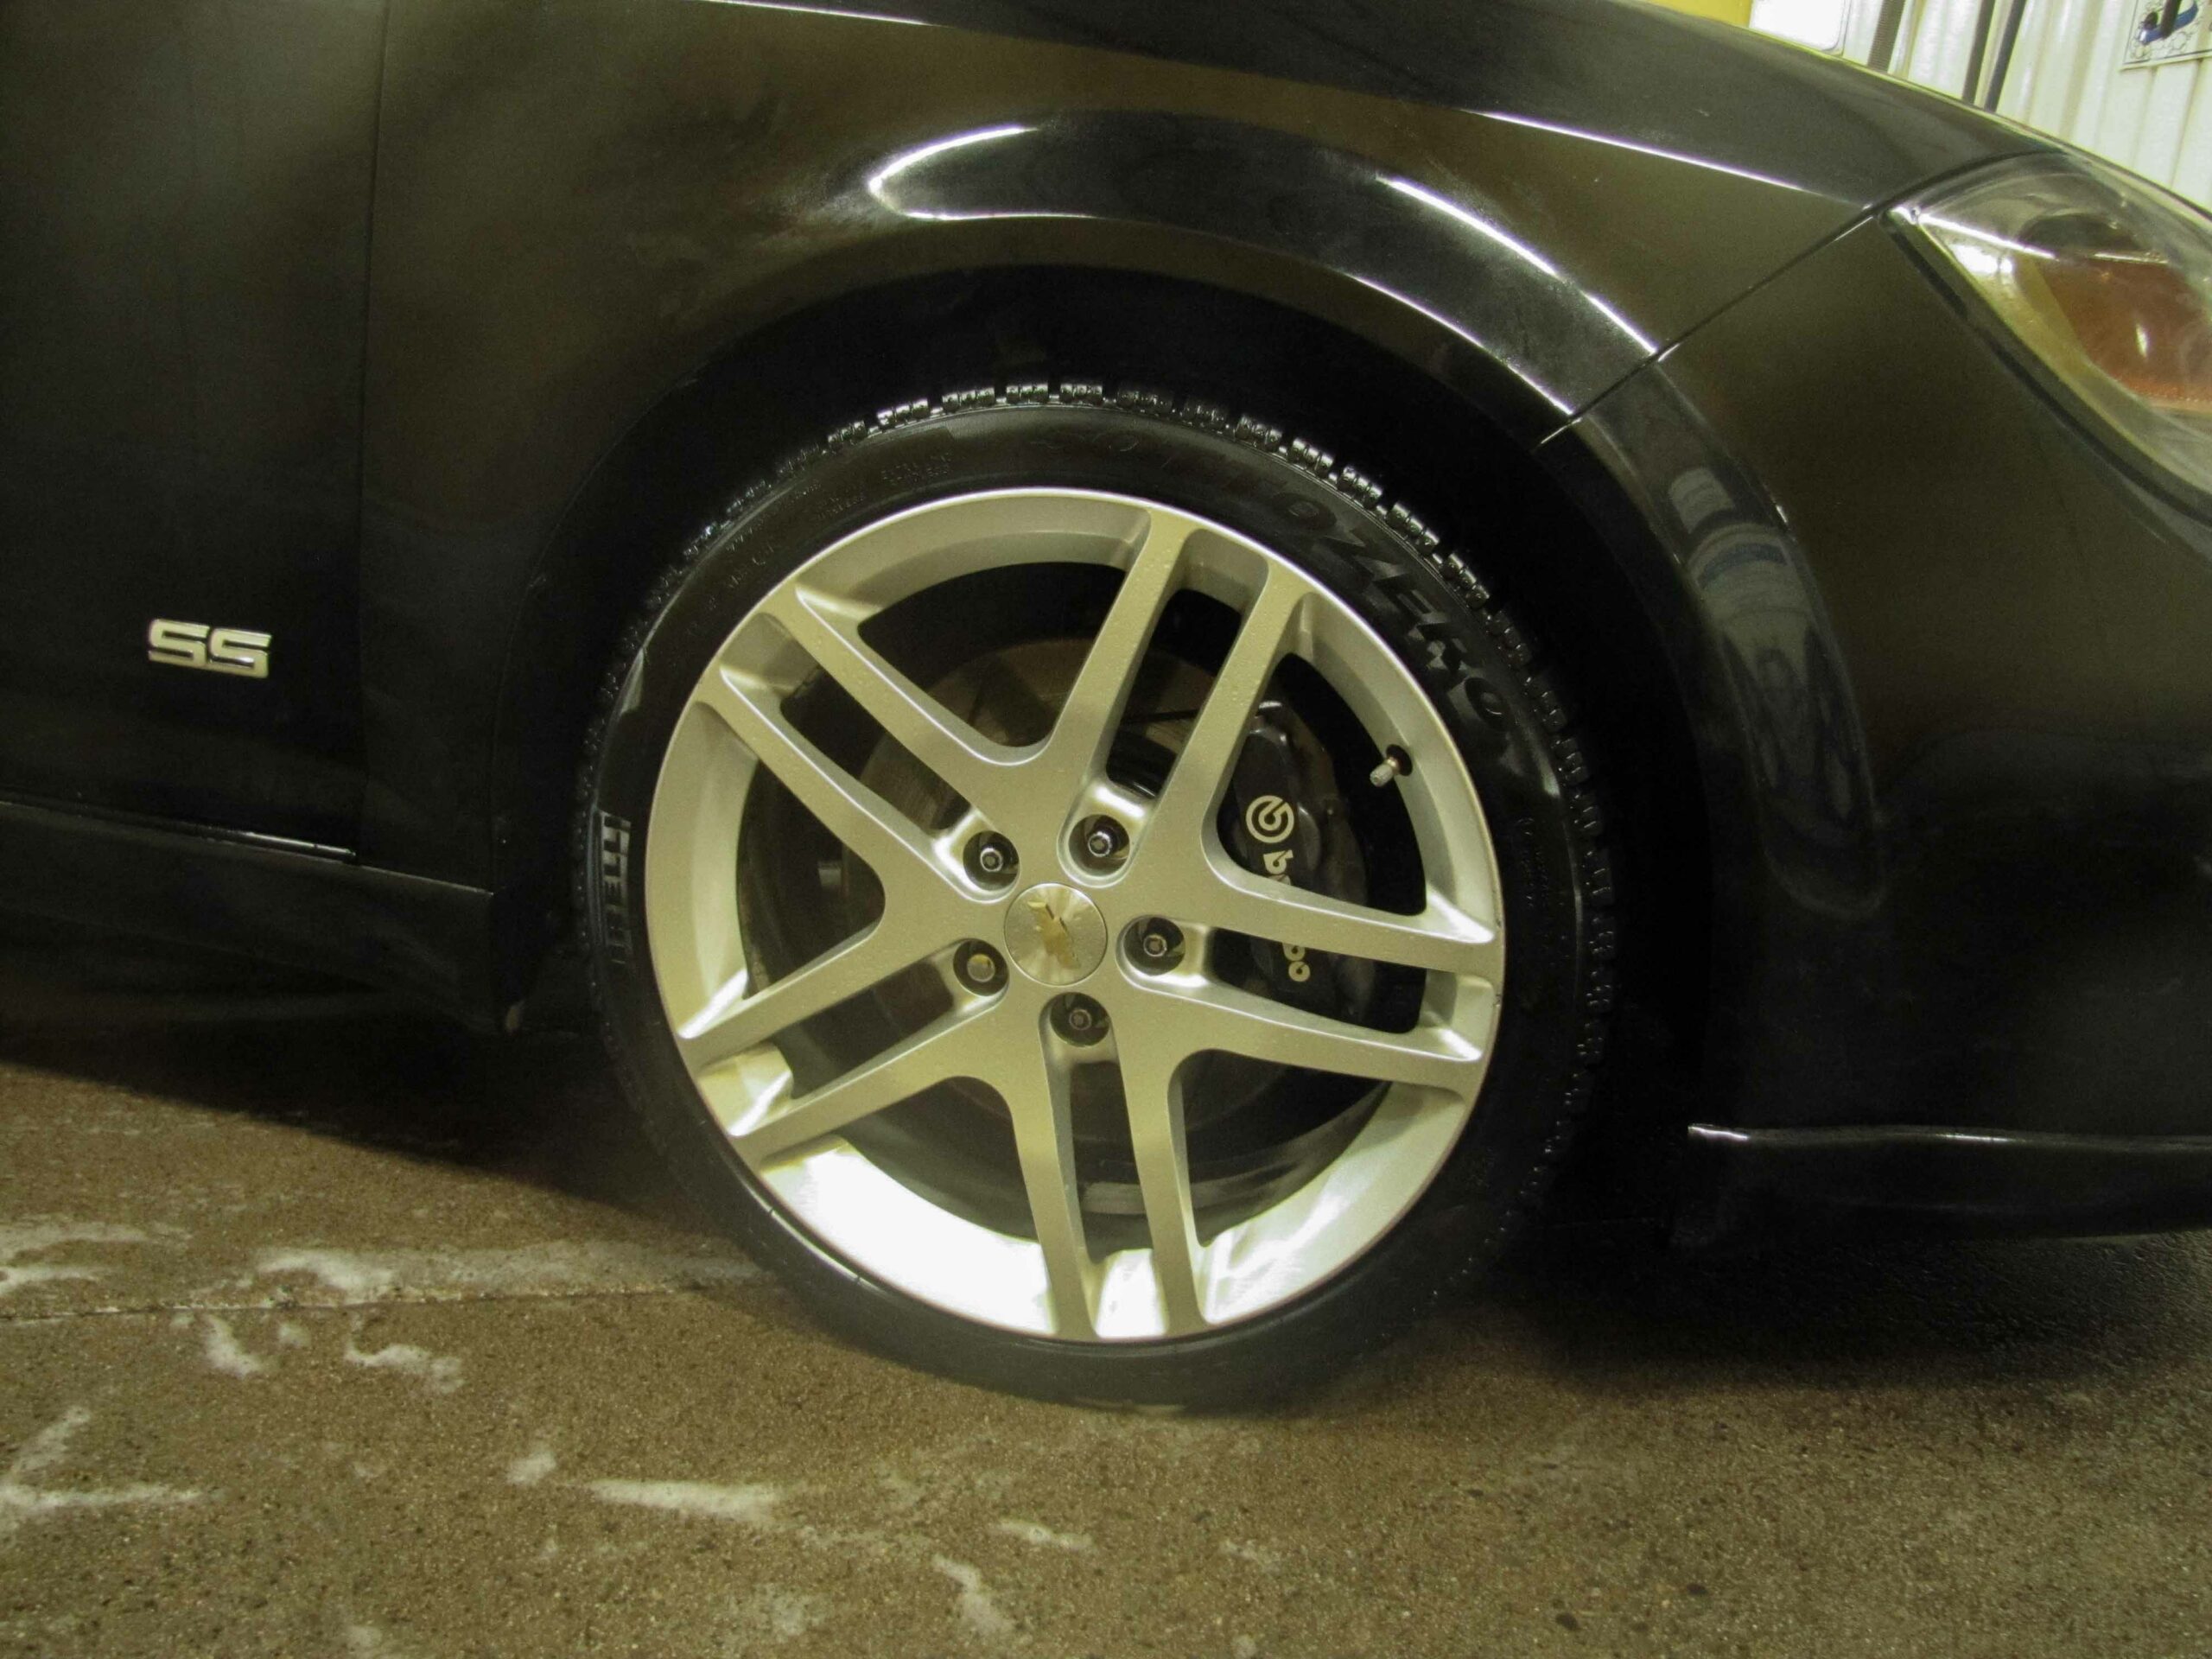 Stock LNF wheels for the modified 2009 Chevrolet Cobalt SS